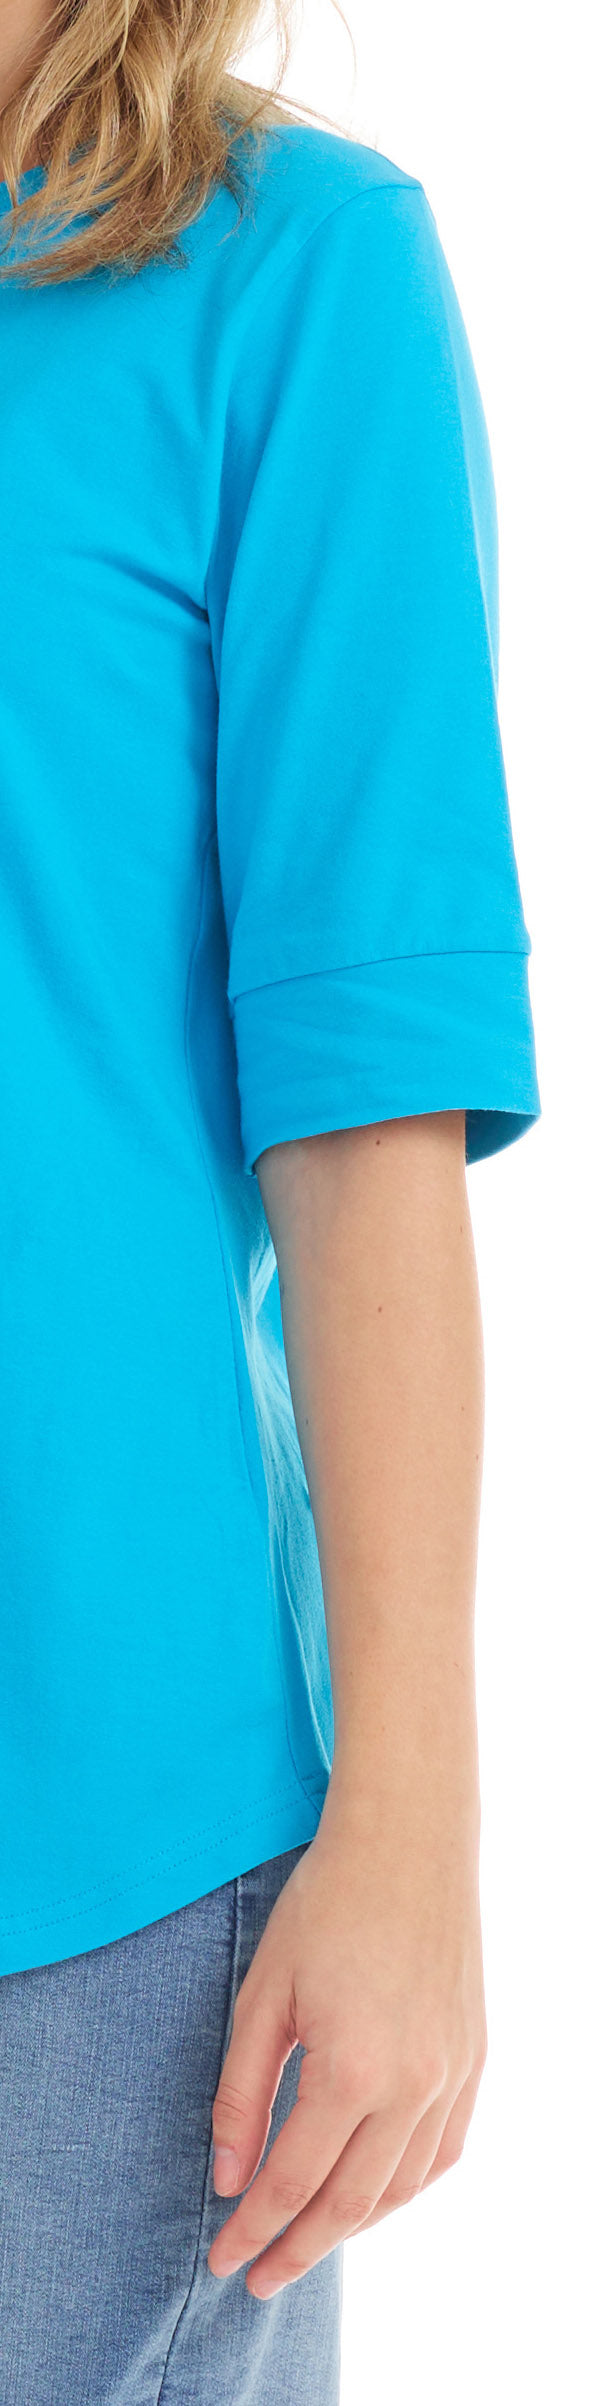 ocean blue elbow sleeve crew neck t-shirt with cuff sleeve